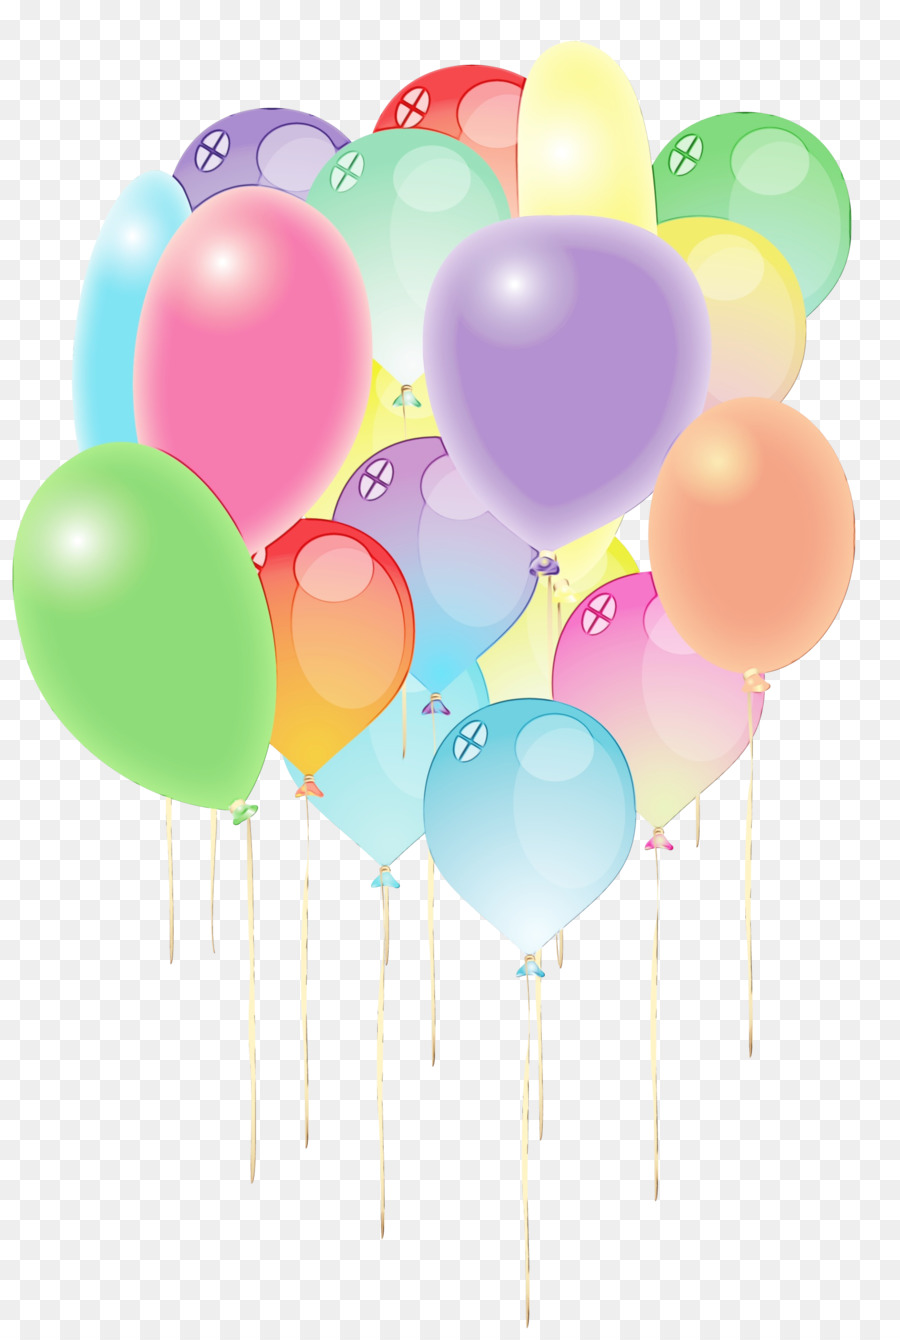 Ballon-Party-Angebot Clip Art Toy Party - 